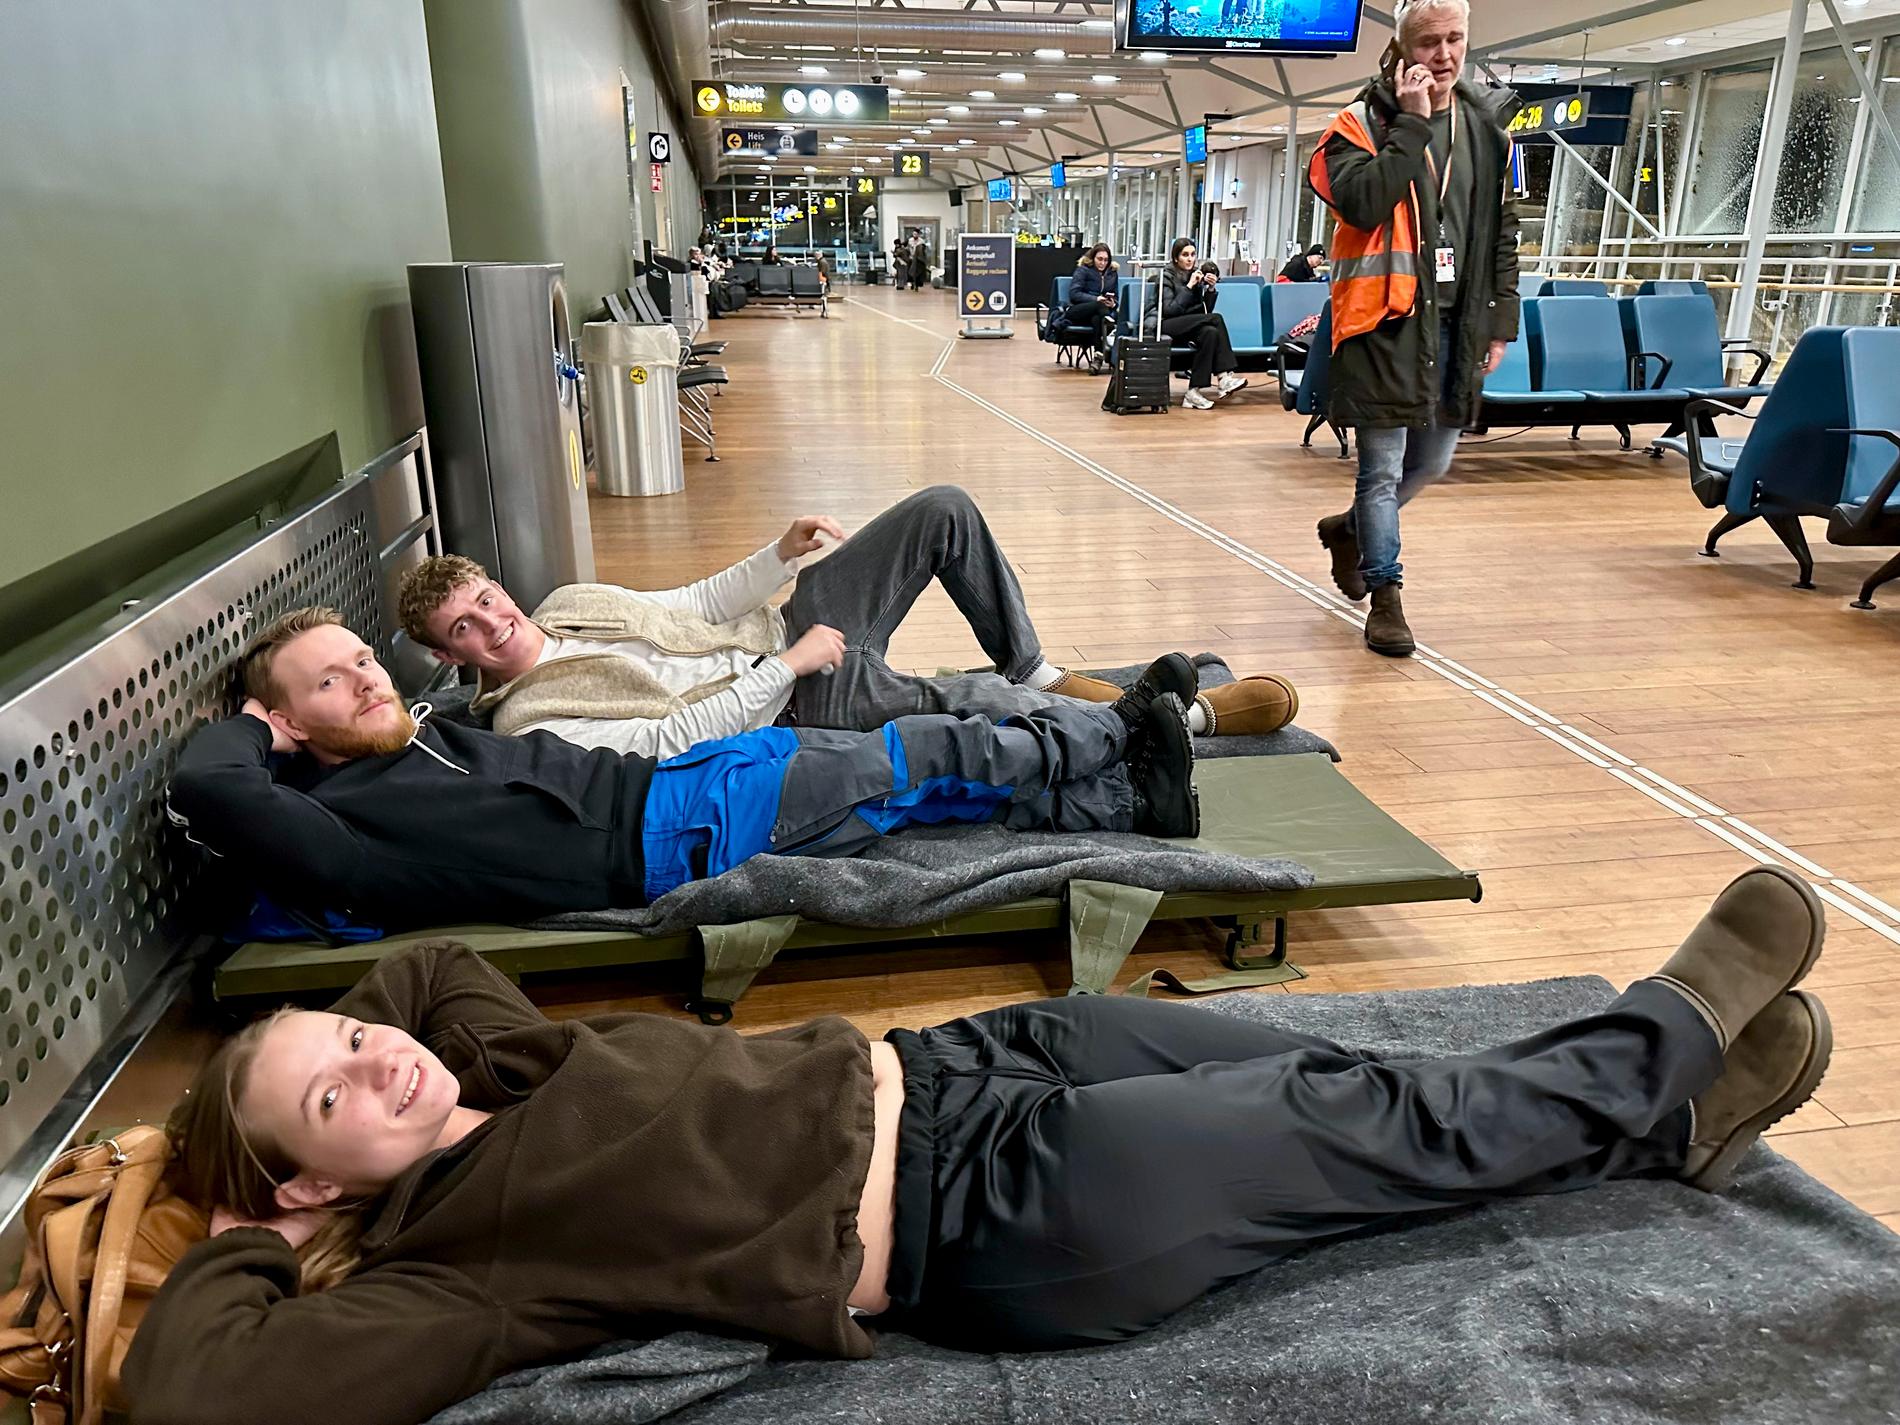 Weather protection: Sanniva Lykanger (20), Ole Matthias Hedlester (22) and Ulrik Bergerud (20) spend the night at the airport.  Airport manager Ivar Helsing Schrøen walks in the background. 